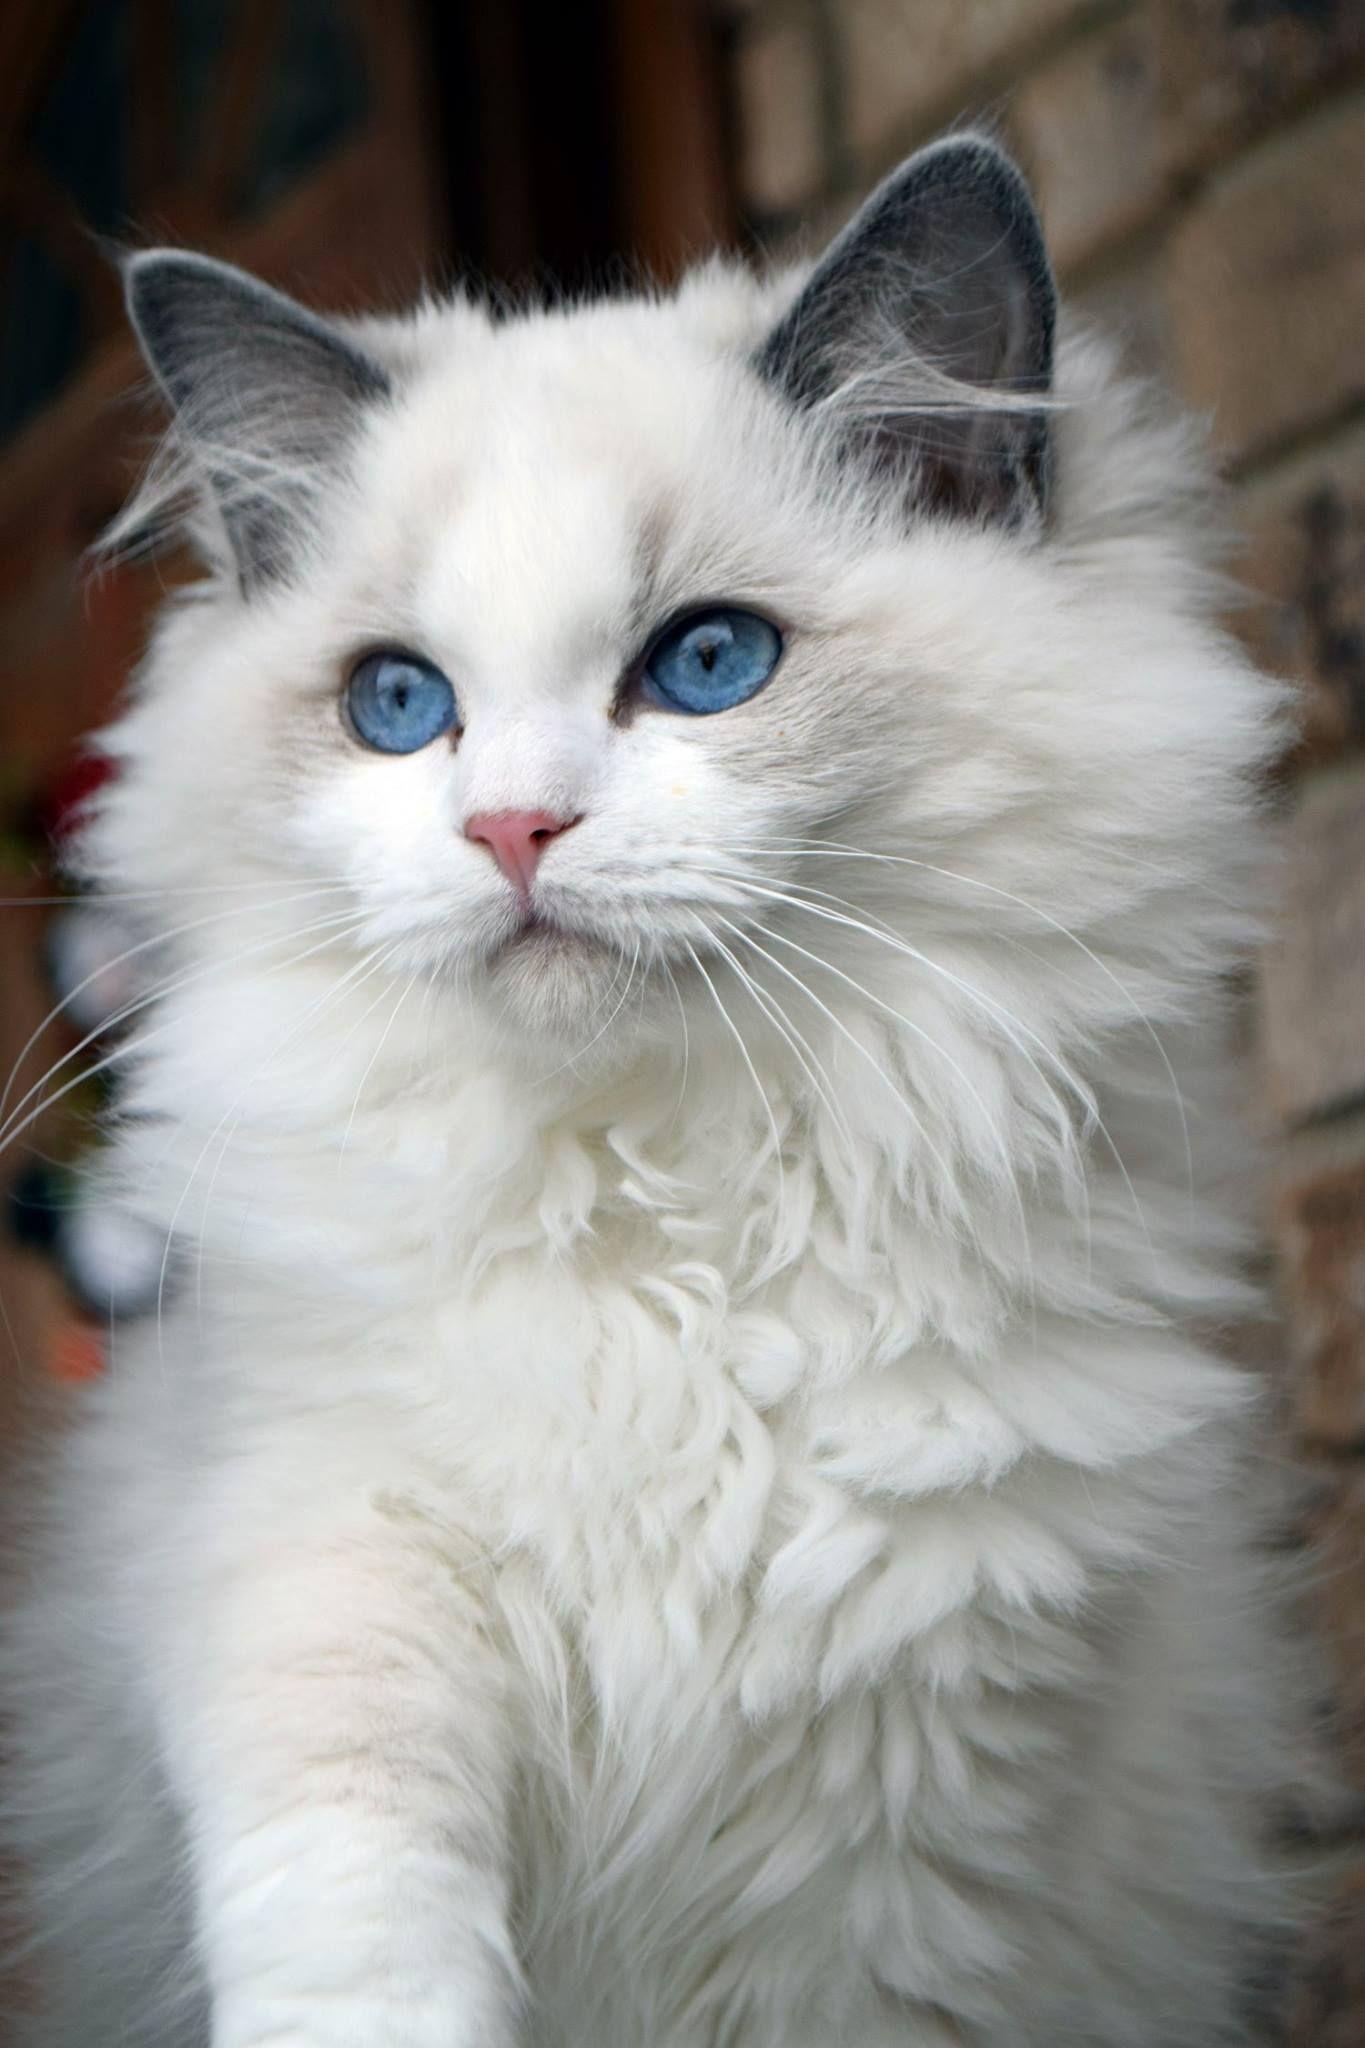 Soooo fluffy and pretty Cell Phone Wallpaper. Cat